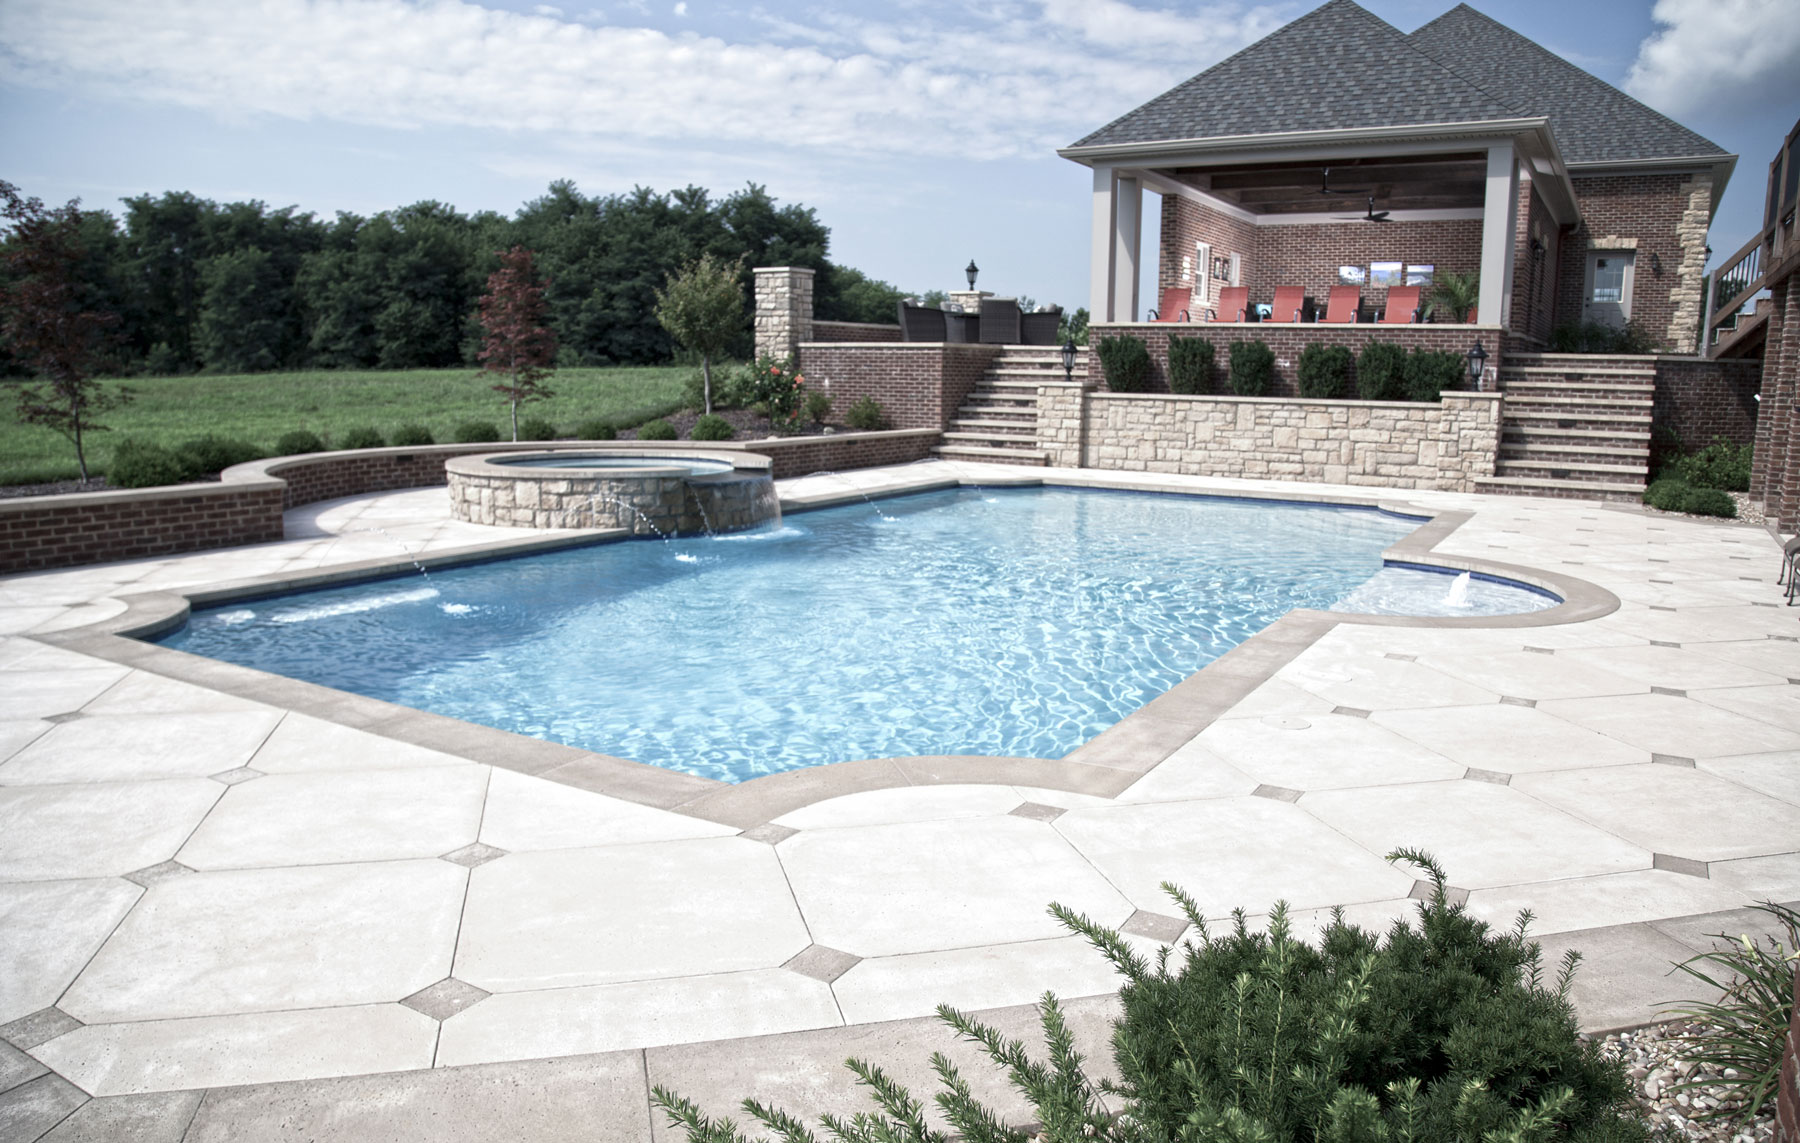 The pavers around pool coping pavers create the main deck space